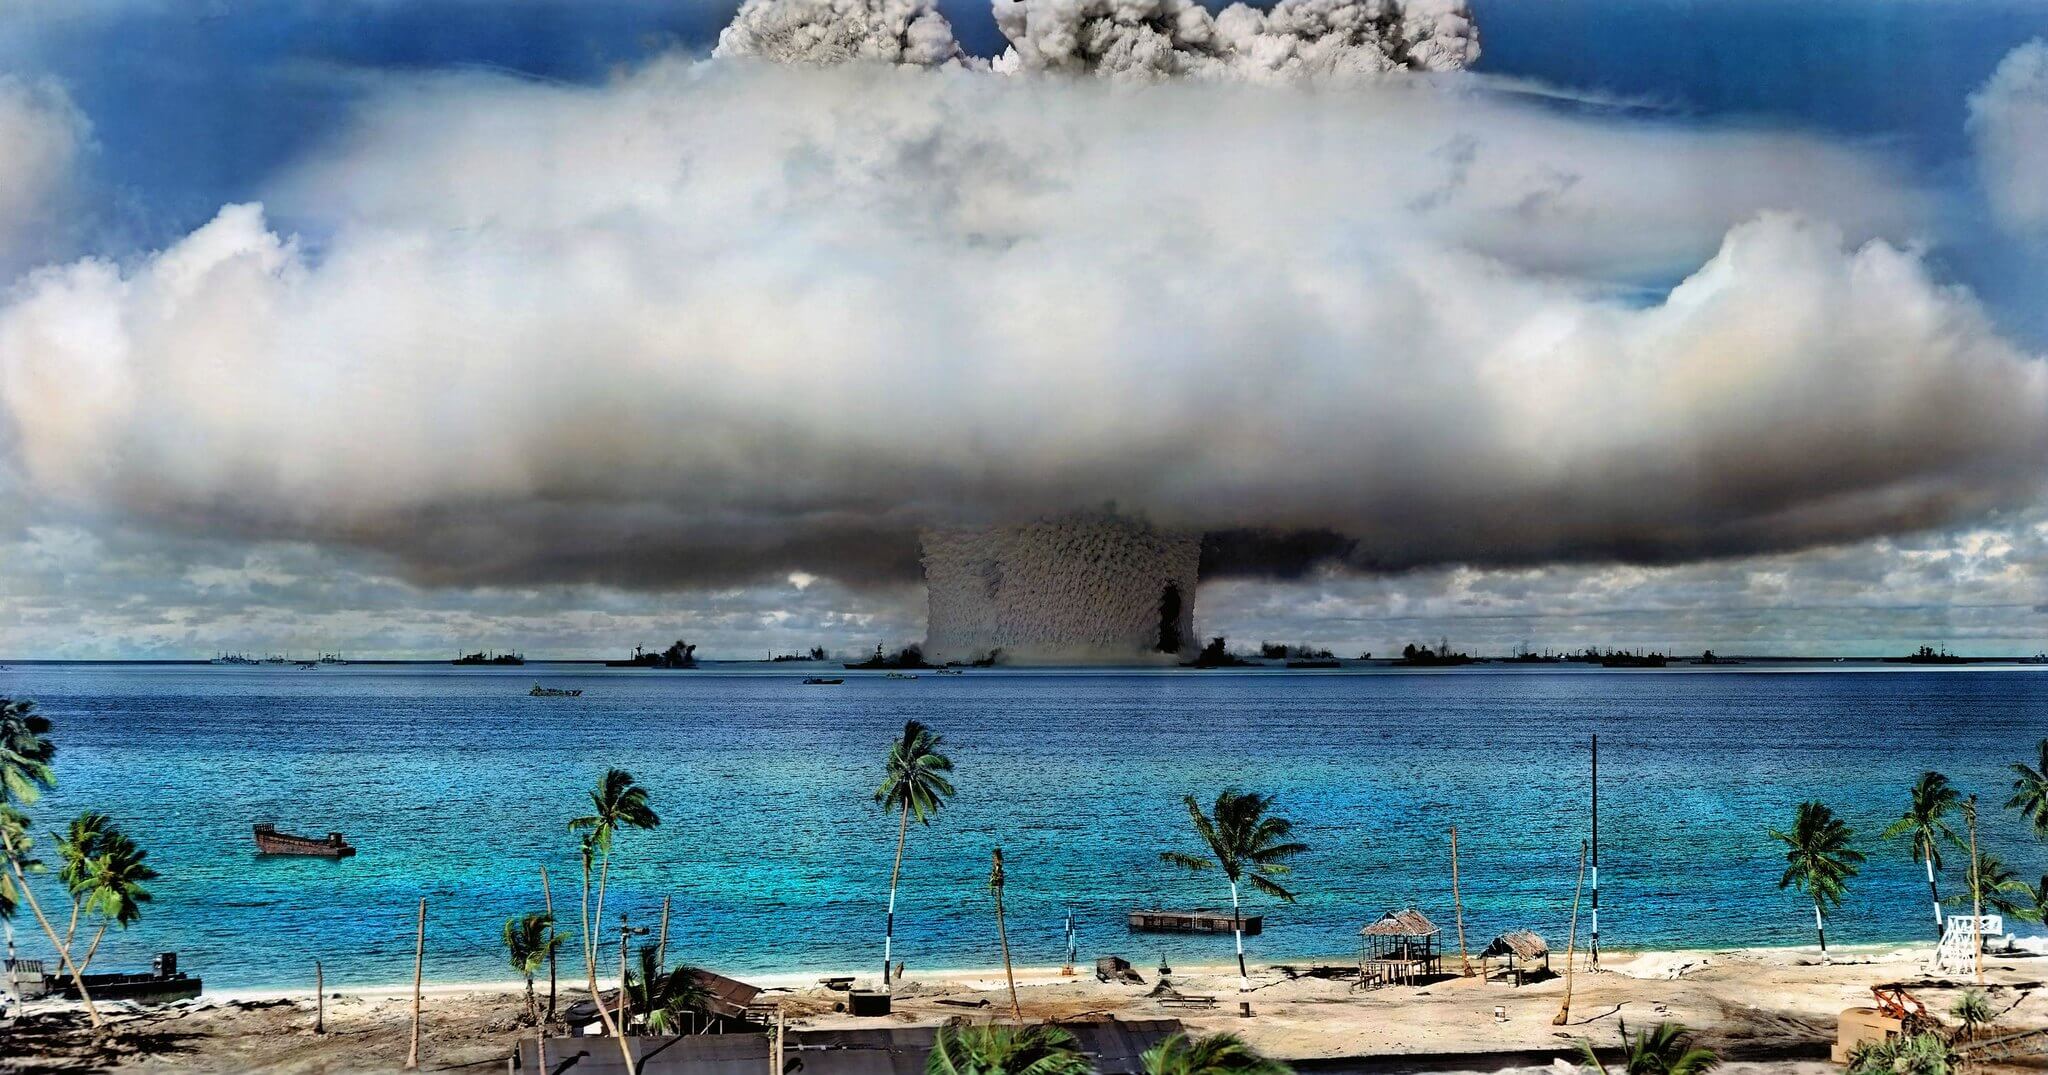 A nuclear weapon is detonated at Bikini Atoll in the Marshall Islands in 1946. (Image has been colorized.) © International Campaign to Abolish Nuclear Weapons